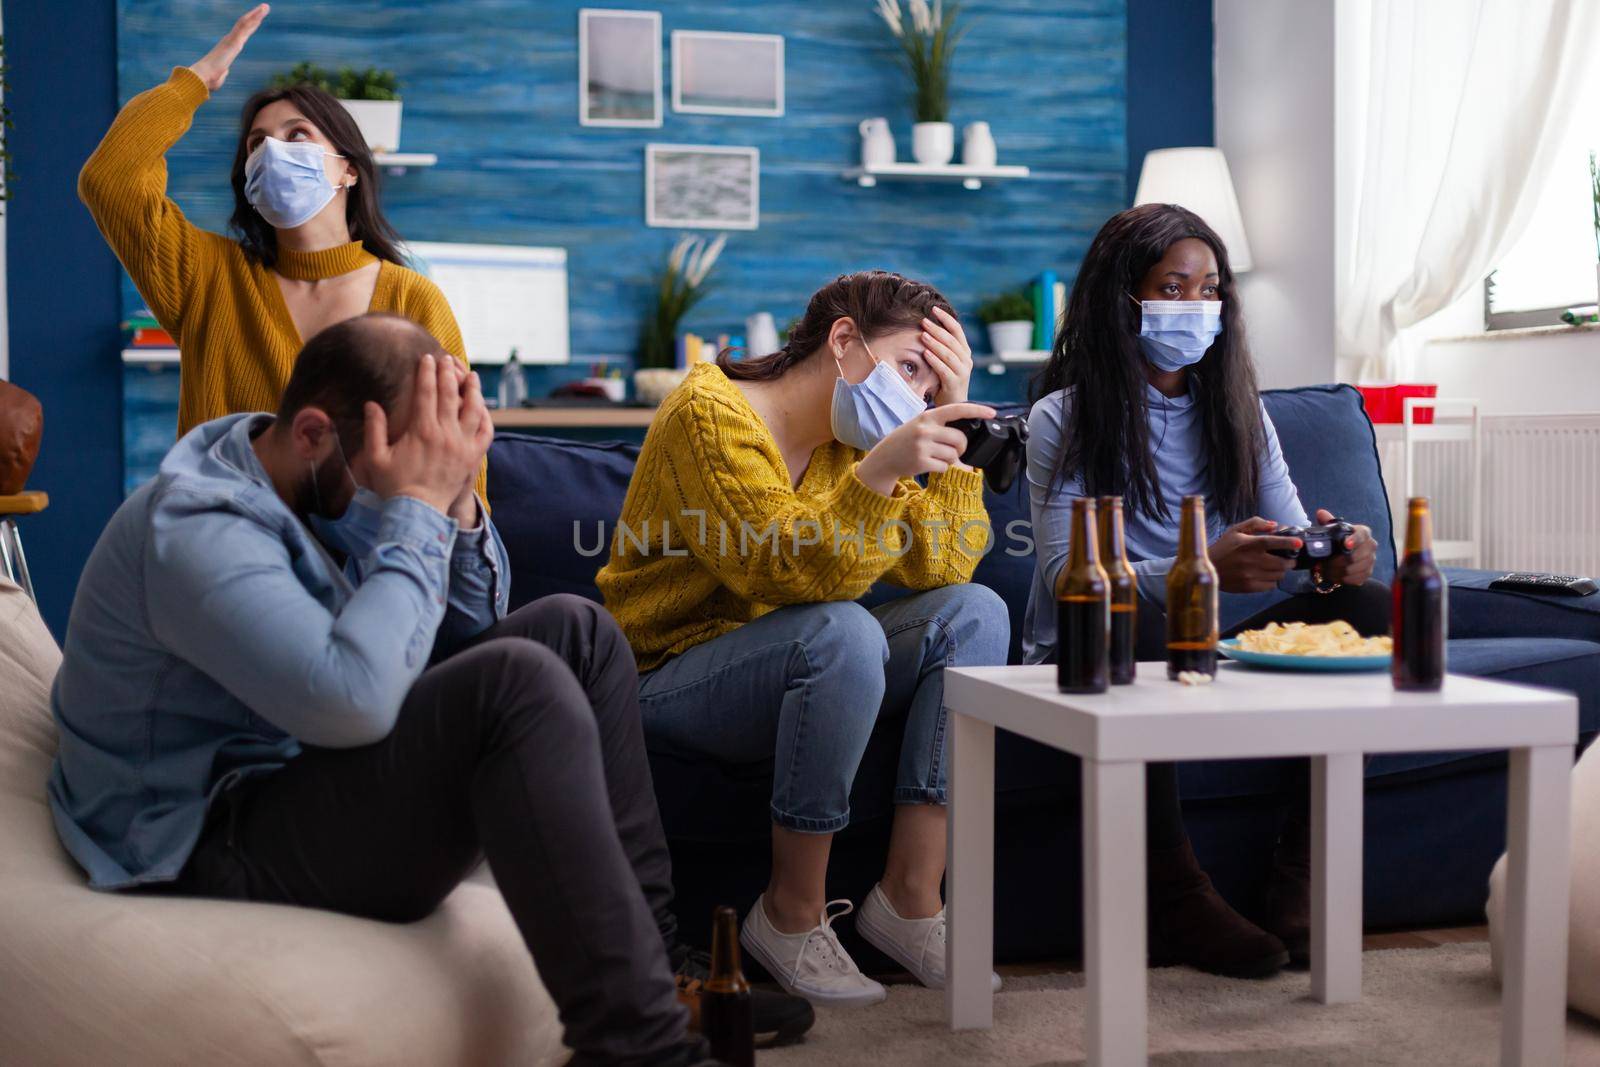 Sad multi ethnic group of friends after lose at gaming competiton with face covers with mask during covid outbreak keepin social distancing in home living room. Enjoying beer and chips. Conceptual image.